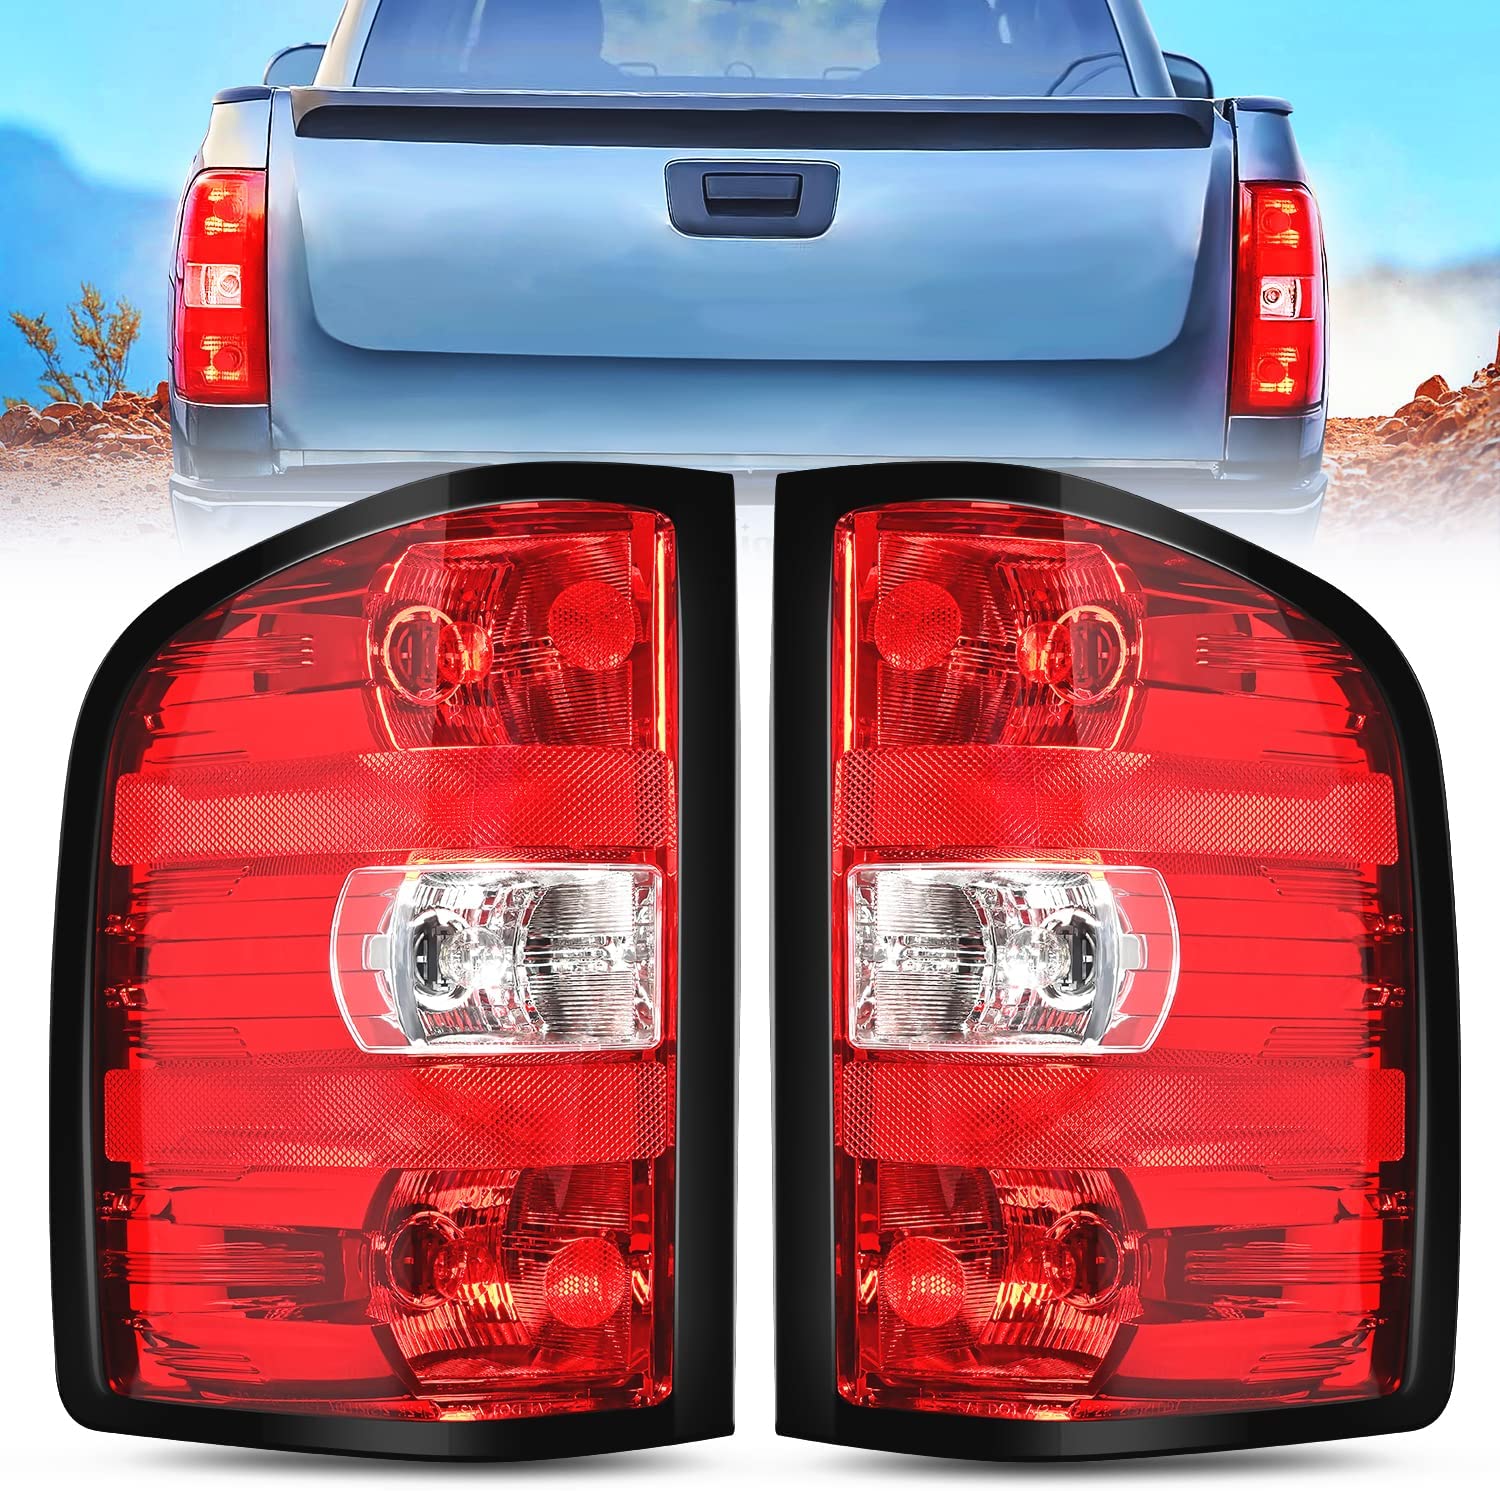 2007-2014 Chevy Silverado 1500 2500HD 3500HD 2007-2013 GMC Sierra 3500HD Taillight Assembly Rear Lamp Replacement w/Bulbs and Harness Nilight